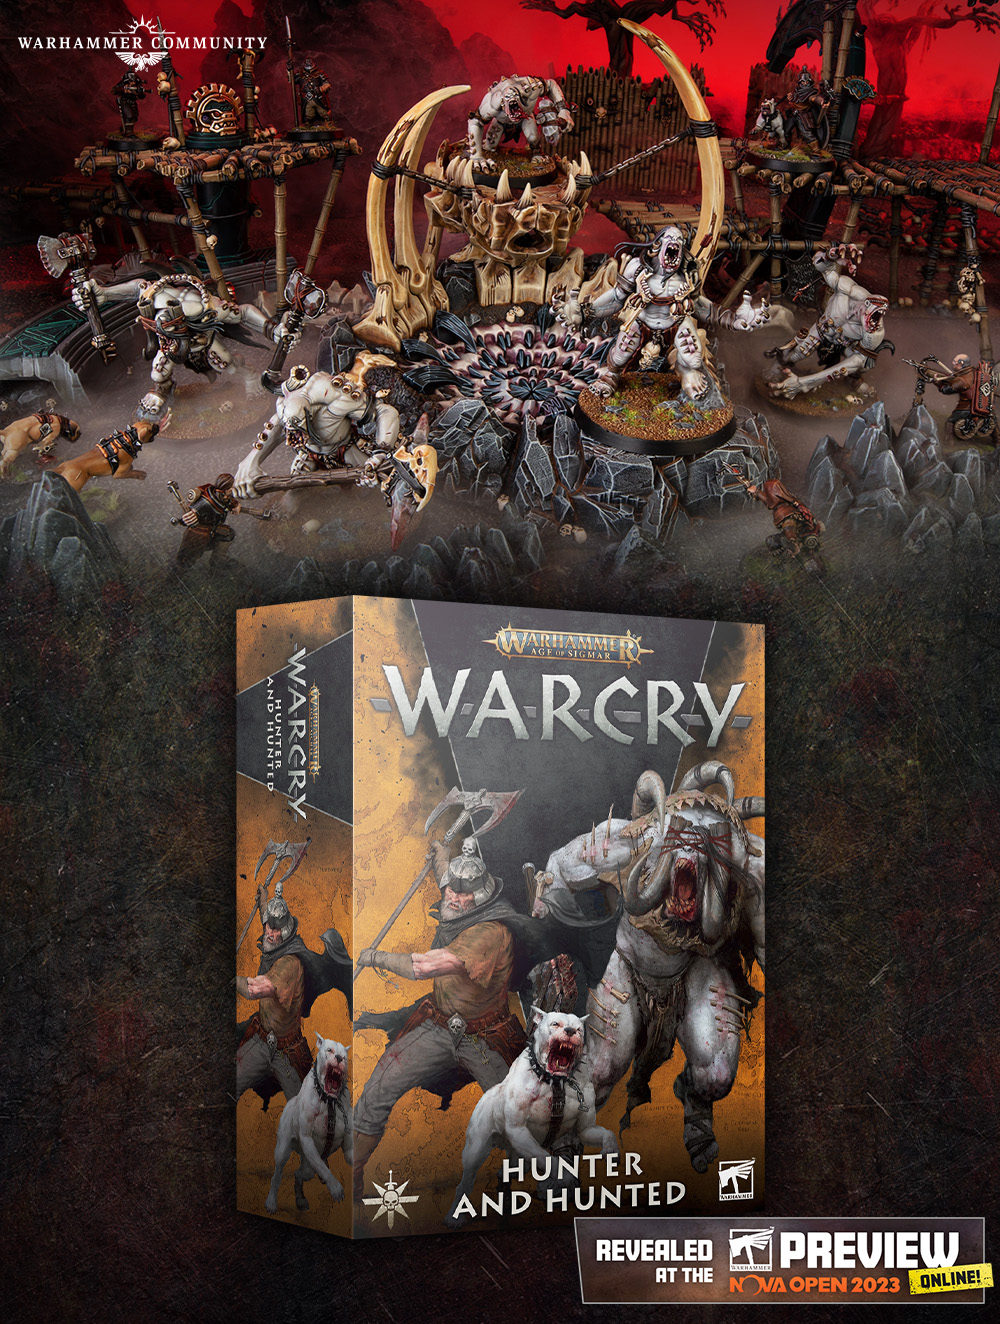 Warhammer 40K Legends Collection - What is the war-cry of the